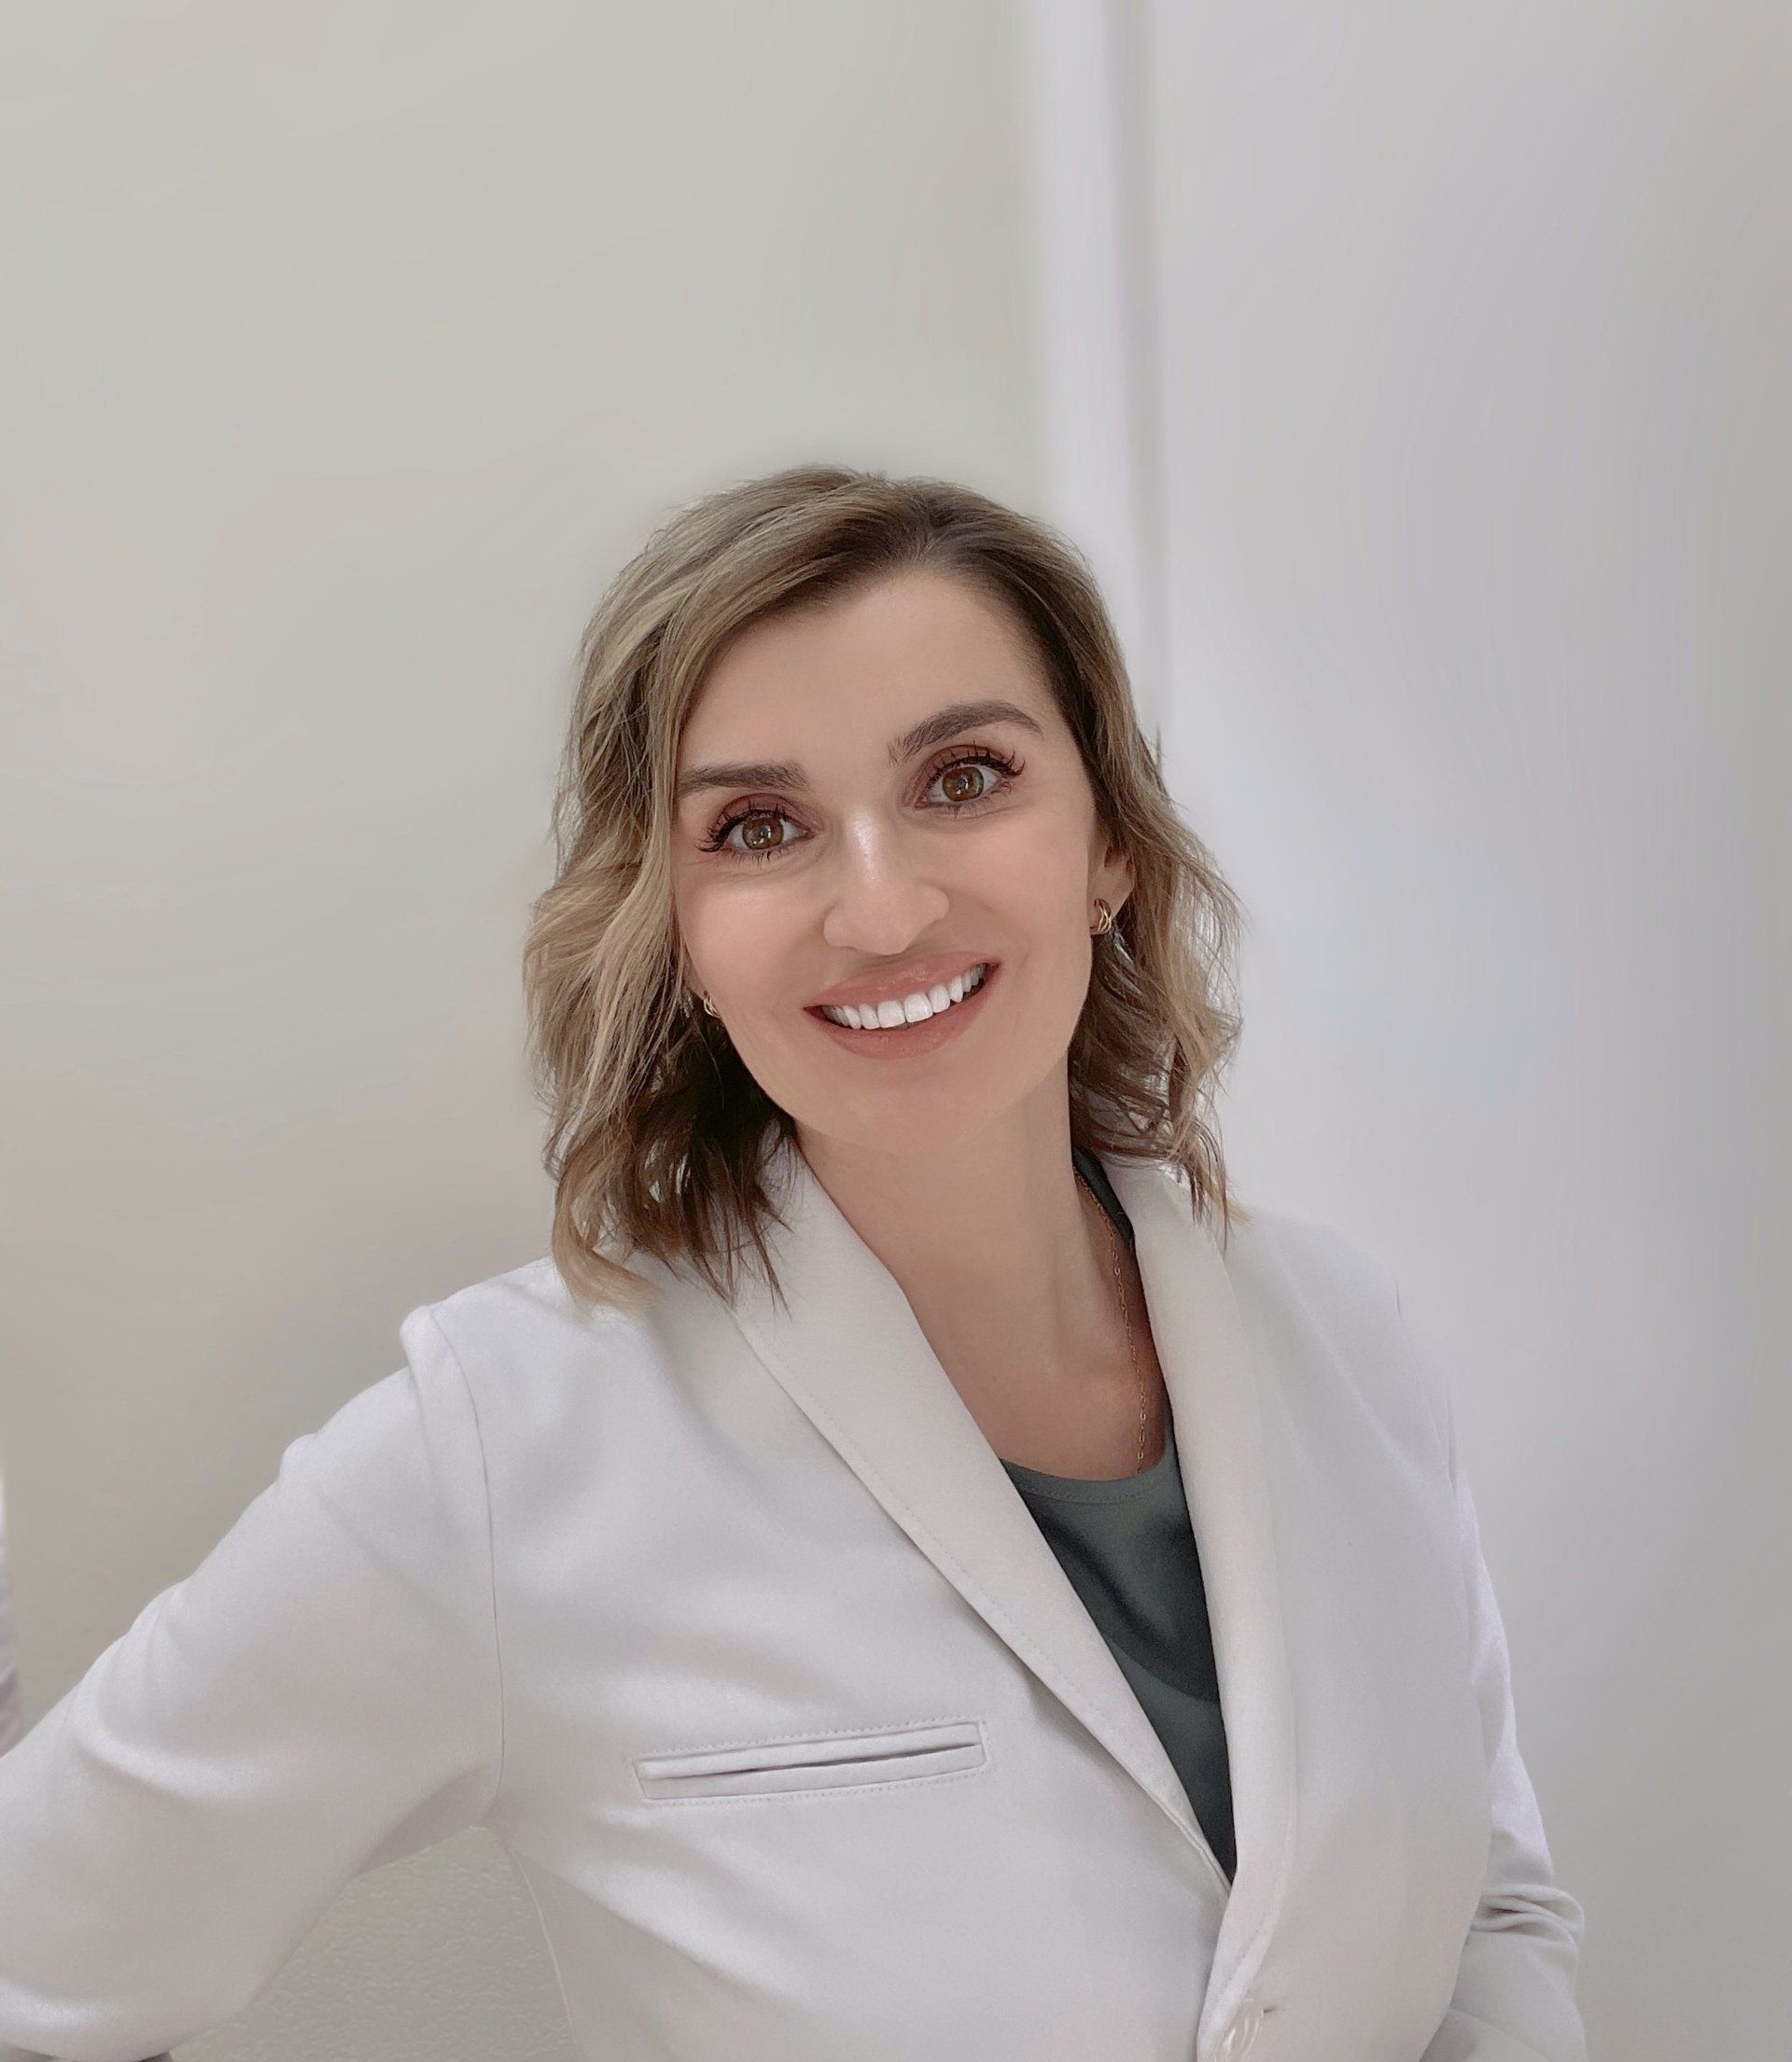 Diana Pencheva, NP - provider at Clearview Dermatology